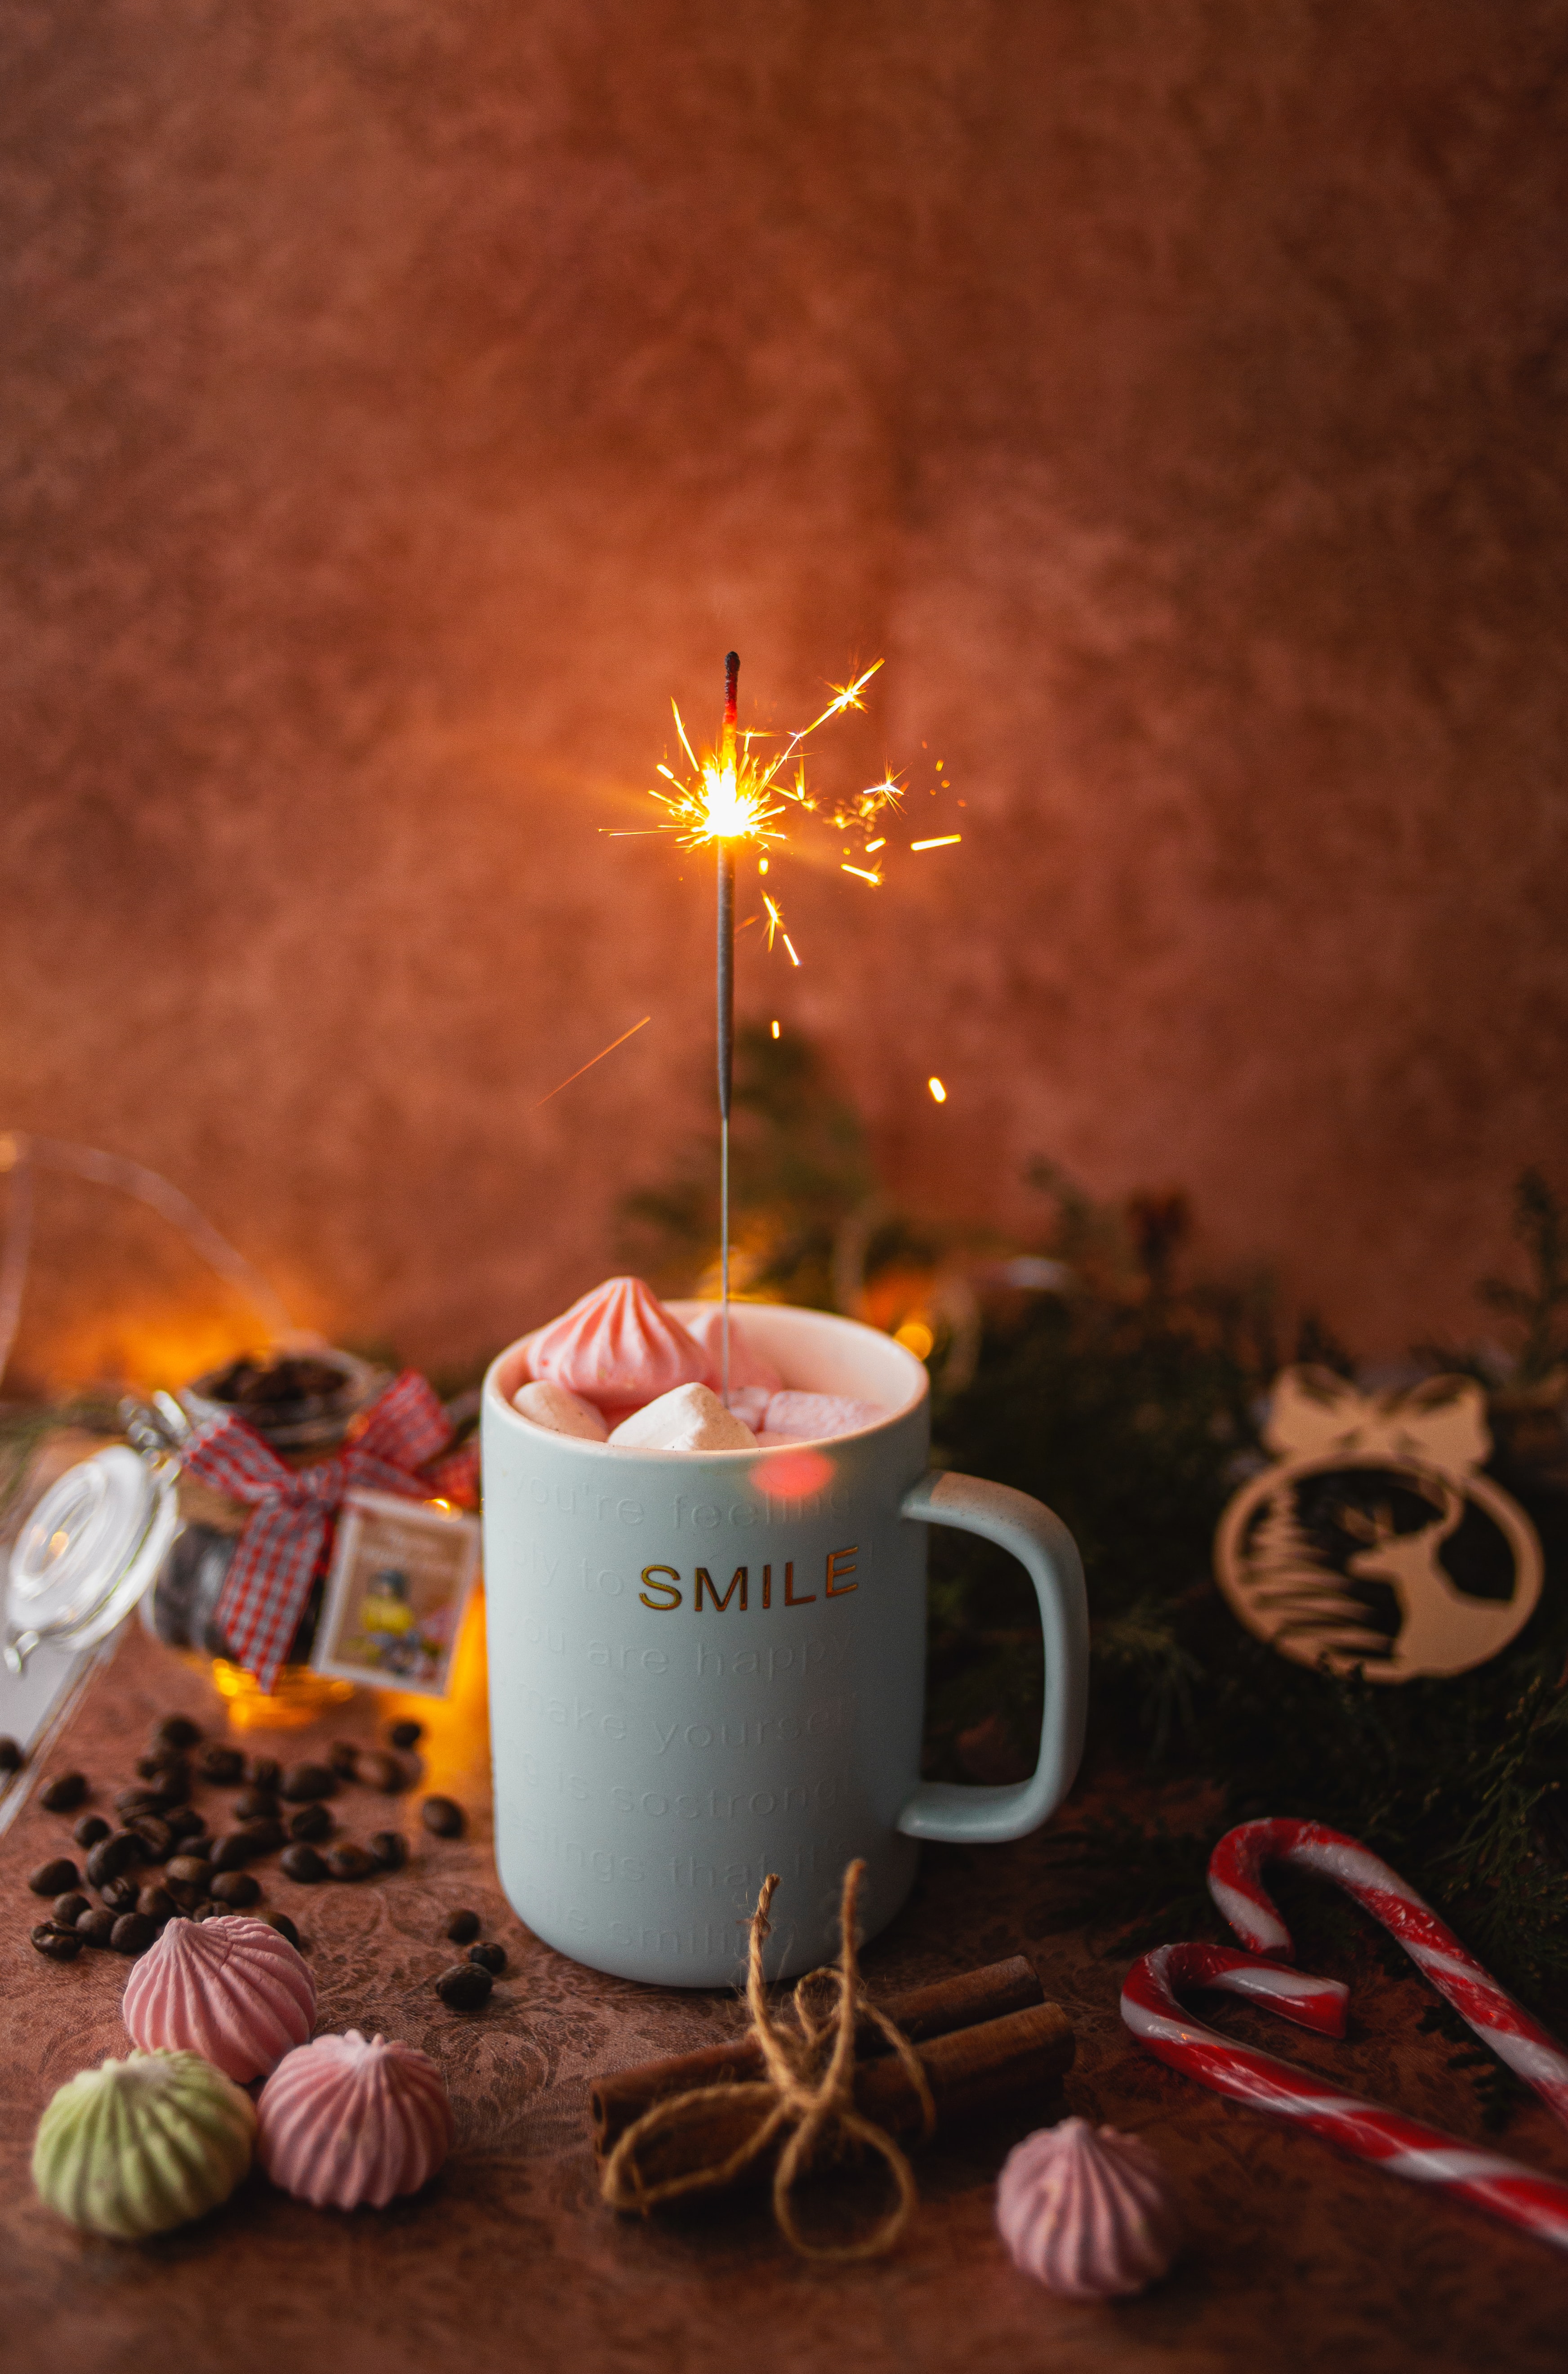 mug, miscellanea, holiday, sparks, cup, miscellaneous, marshmallow, bengal lights, sparklers, zephyr